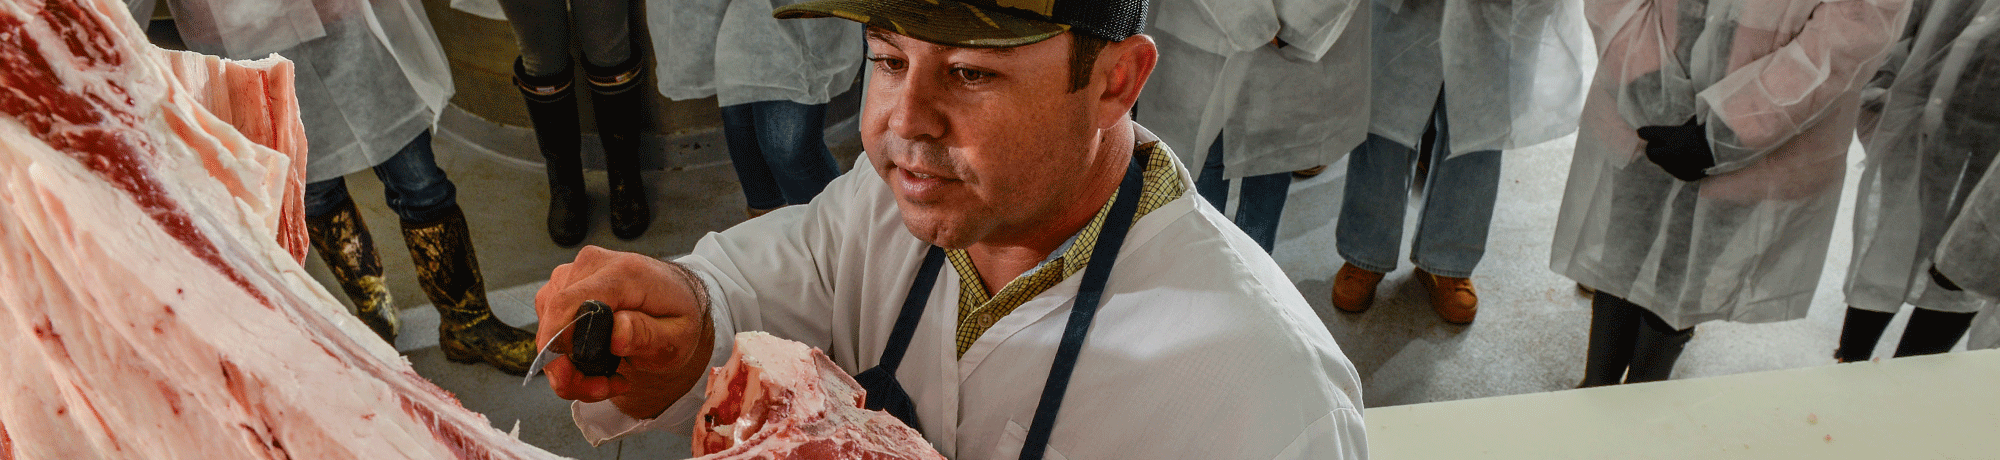 A man uses a nice to illustrate how to butcher meat.